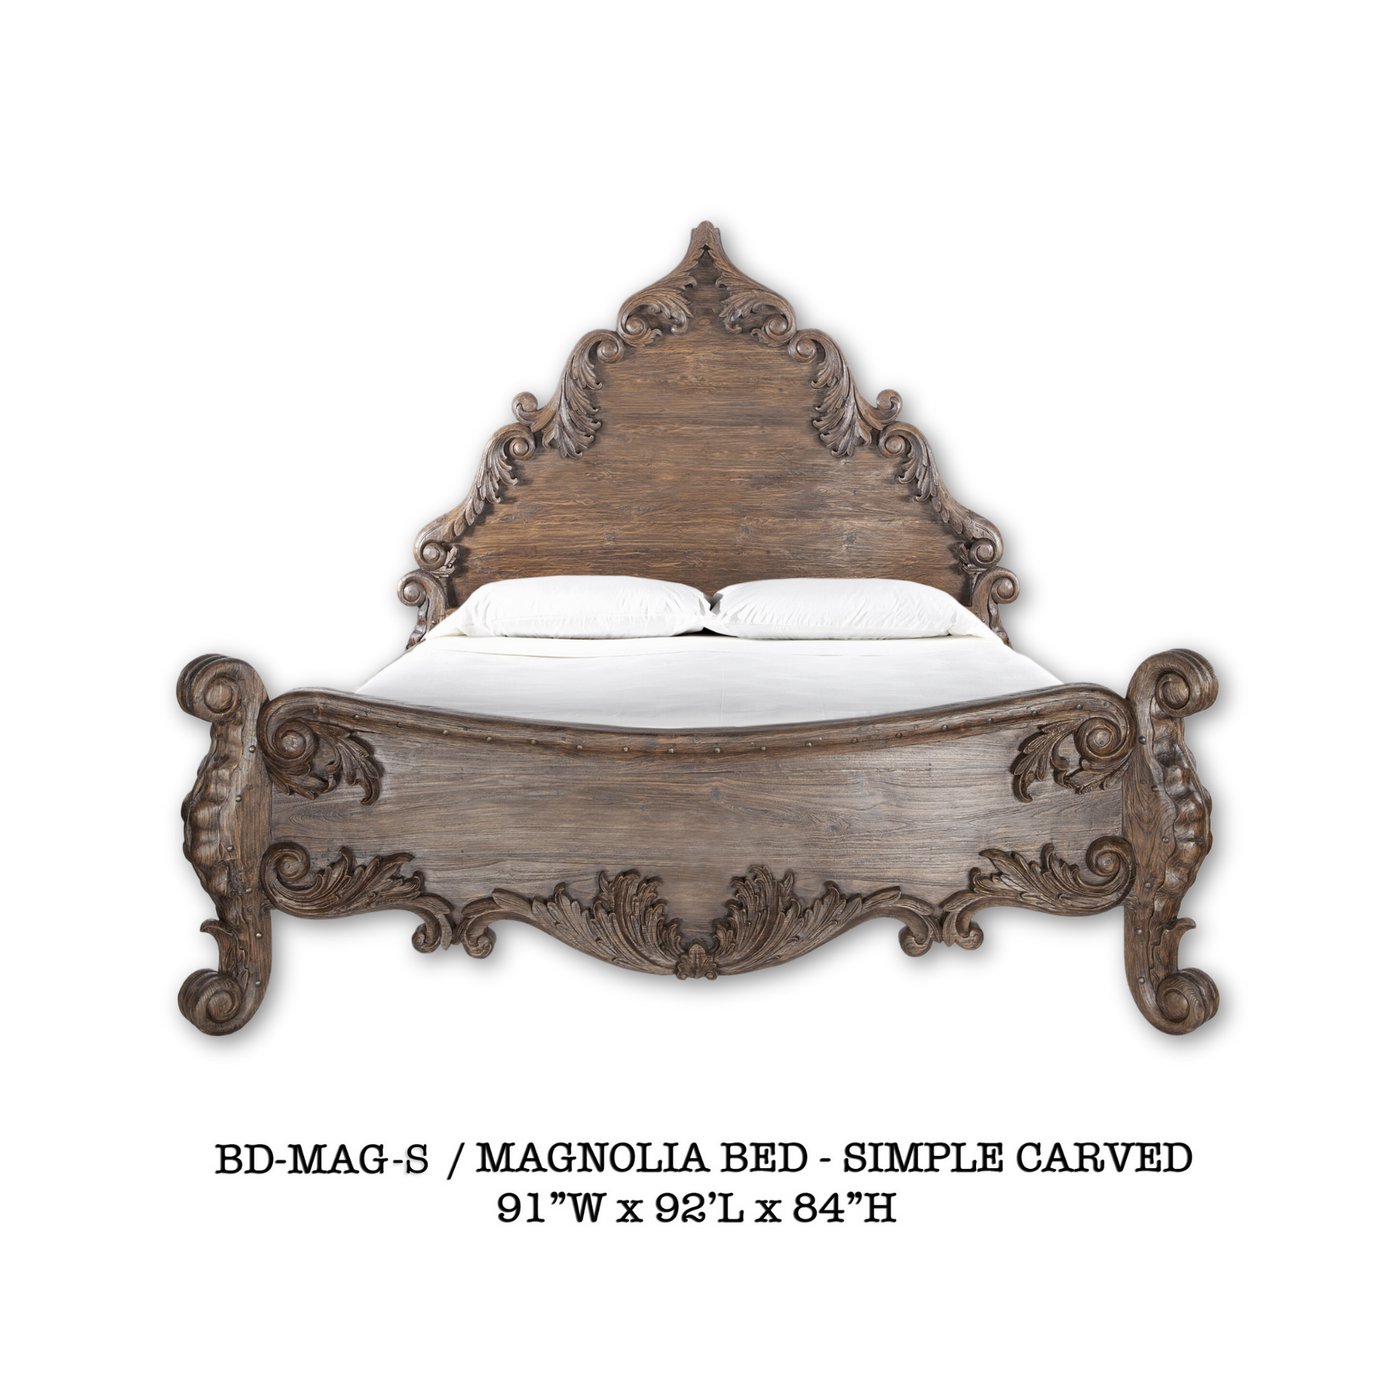 Magnolia King Bed-Simple Carved